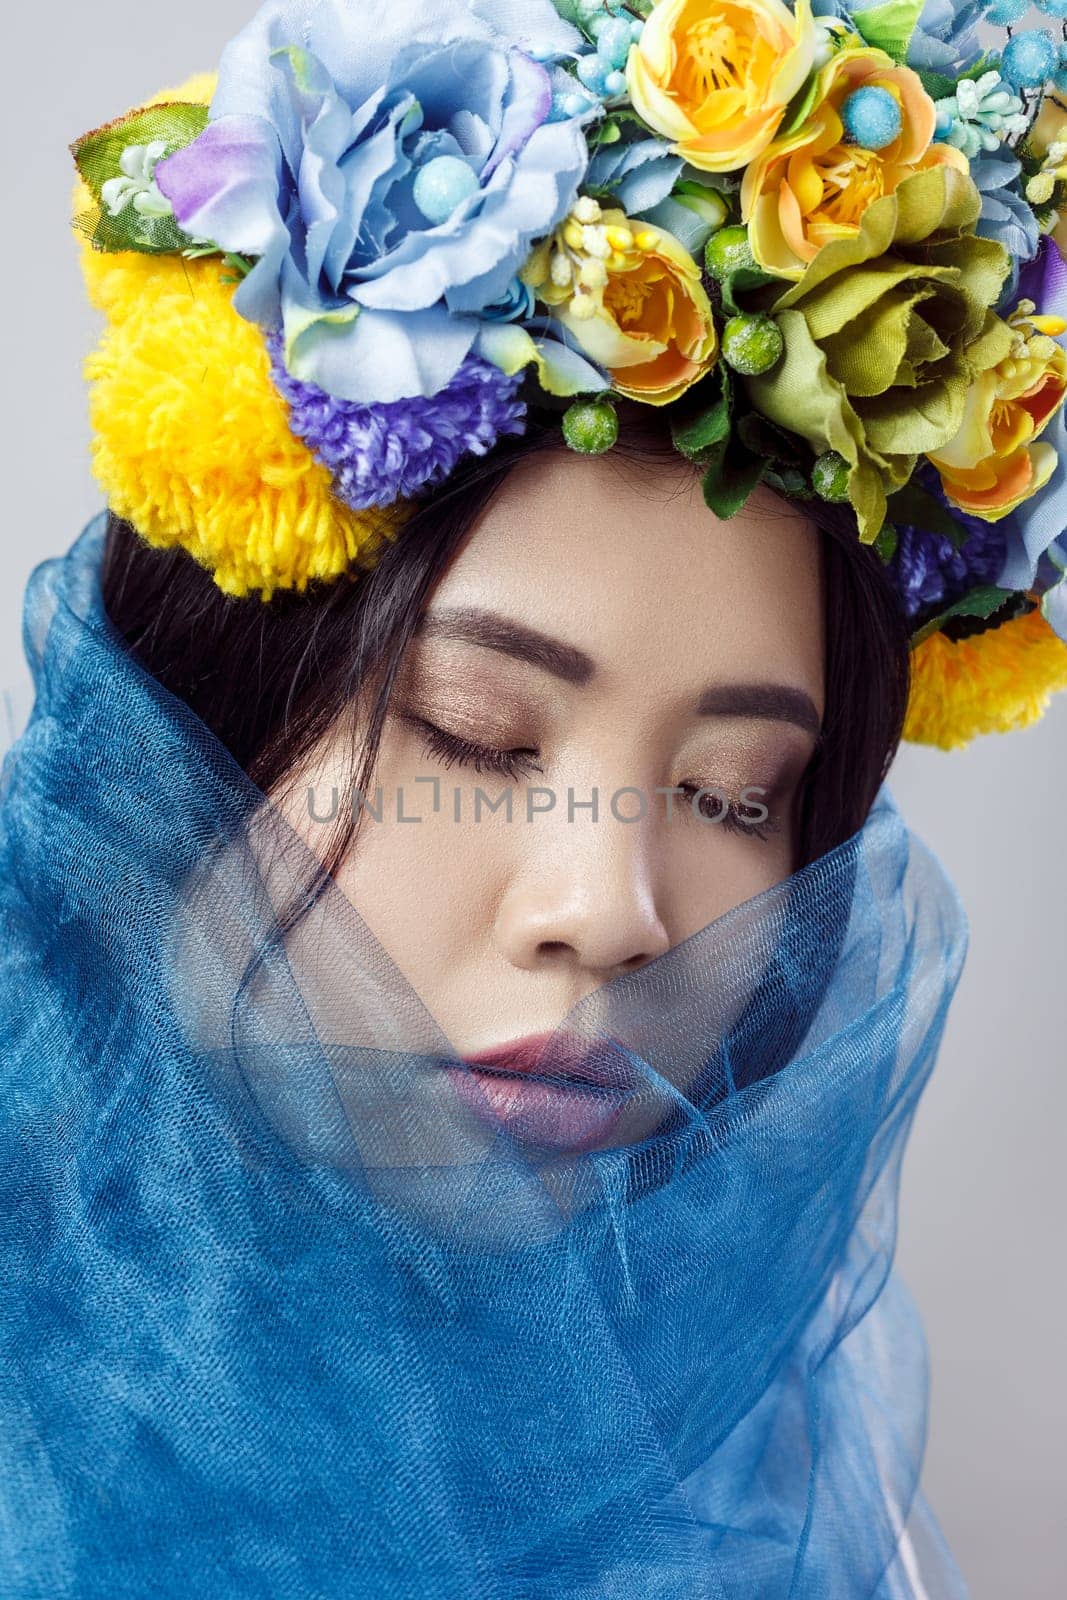 Woman with beautiful makeup , dark hair, with floral hat and blue veil, posing with closed eyes. by Khosro1